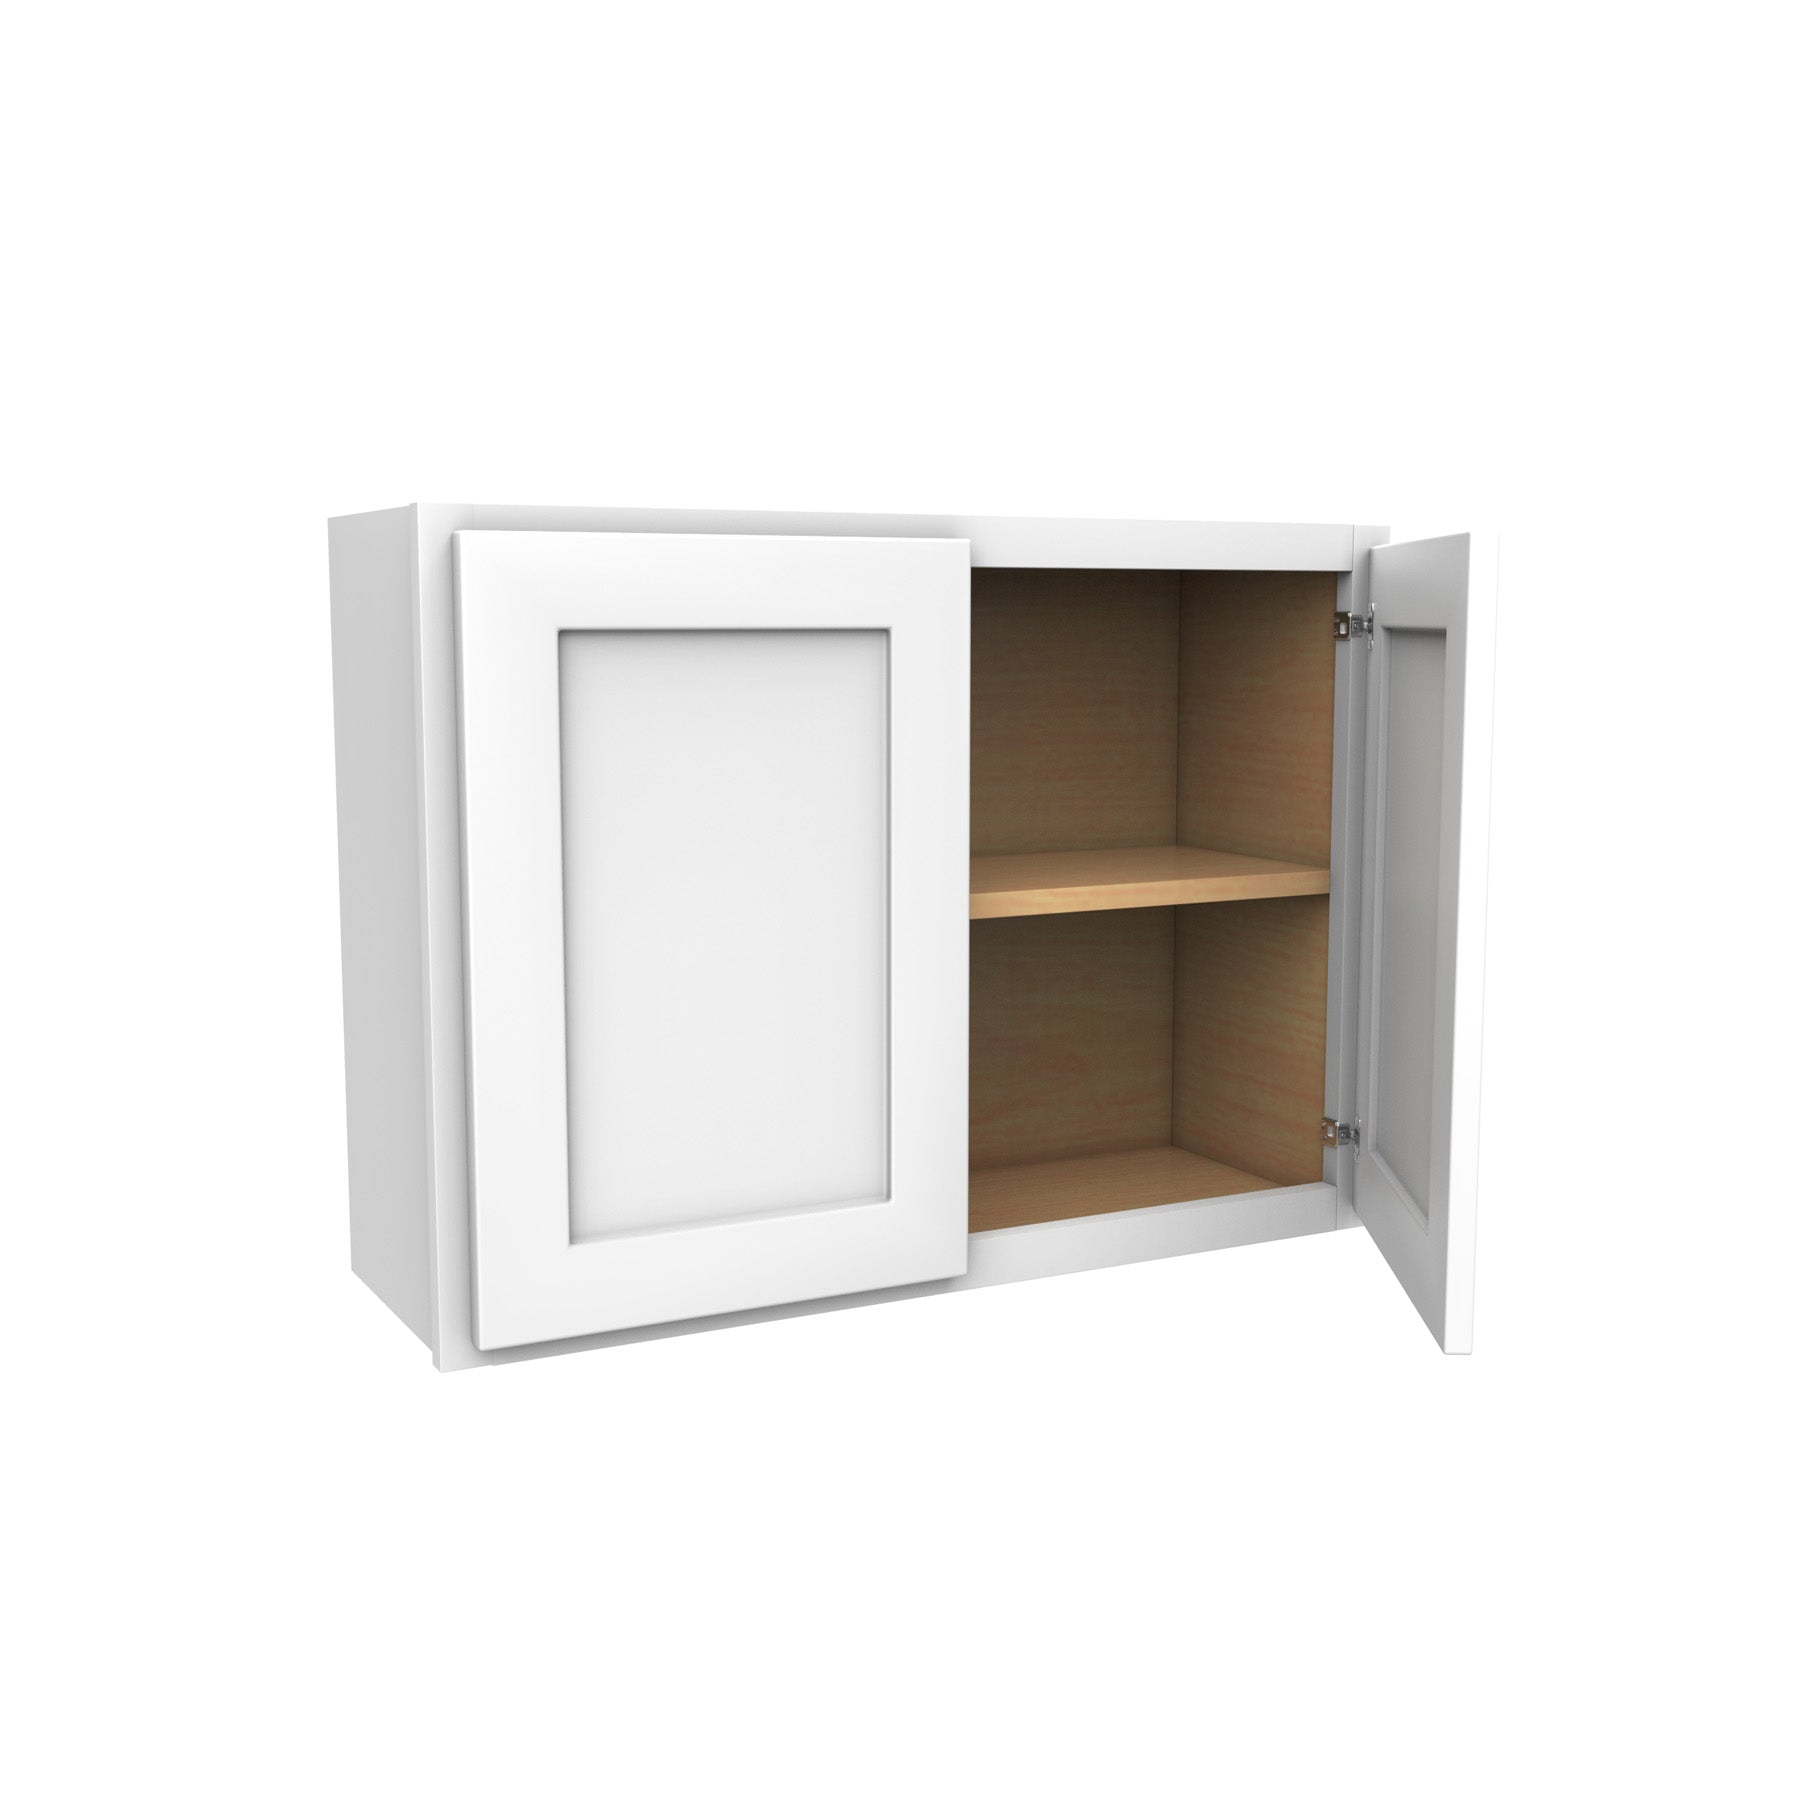 Luxor White - Double Door Wall Cabinet | 33"W x 24"H x 12"D